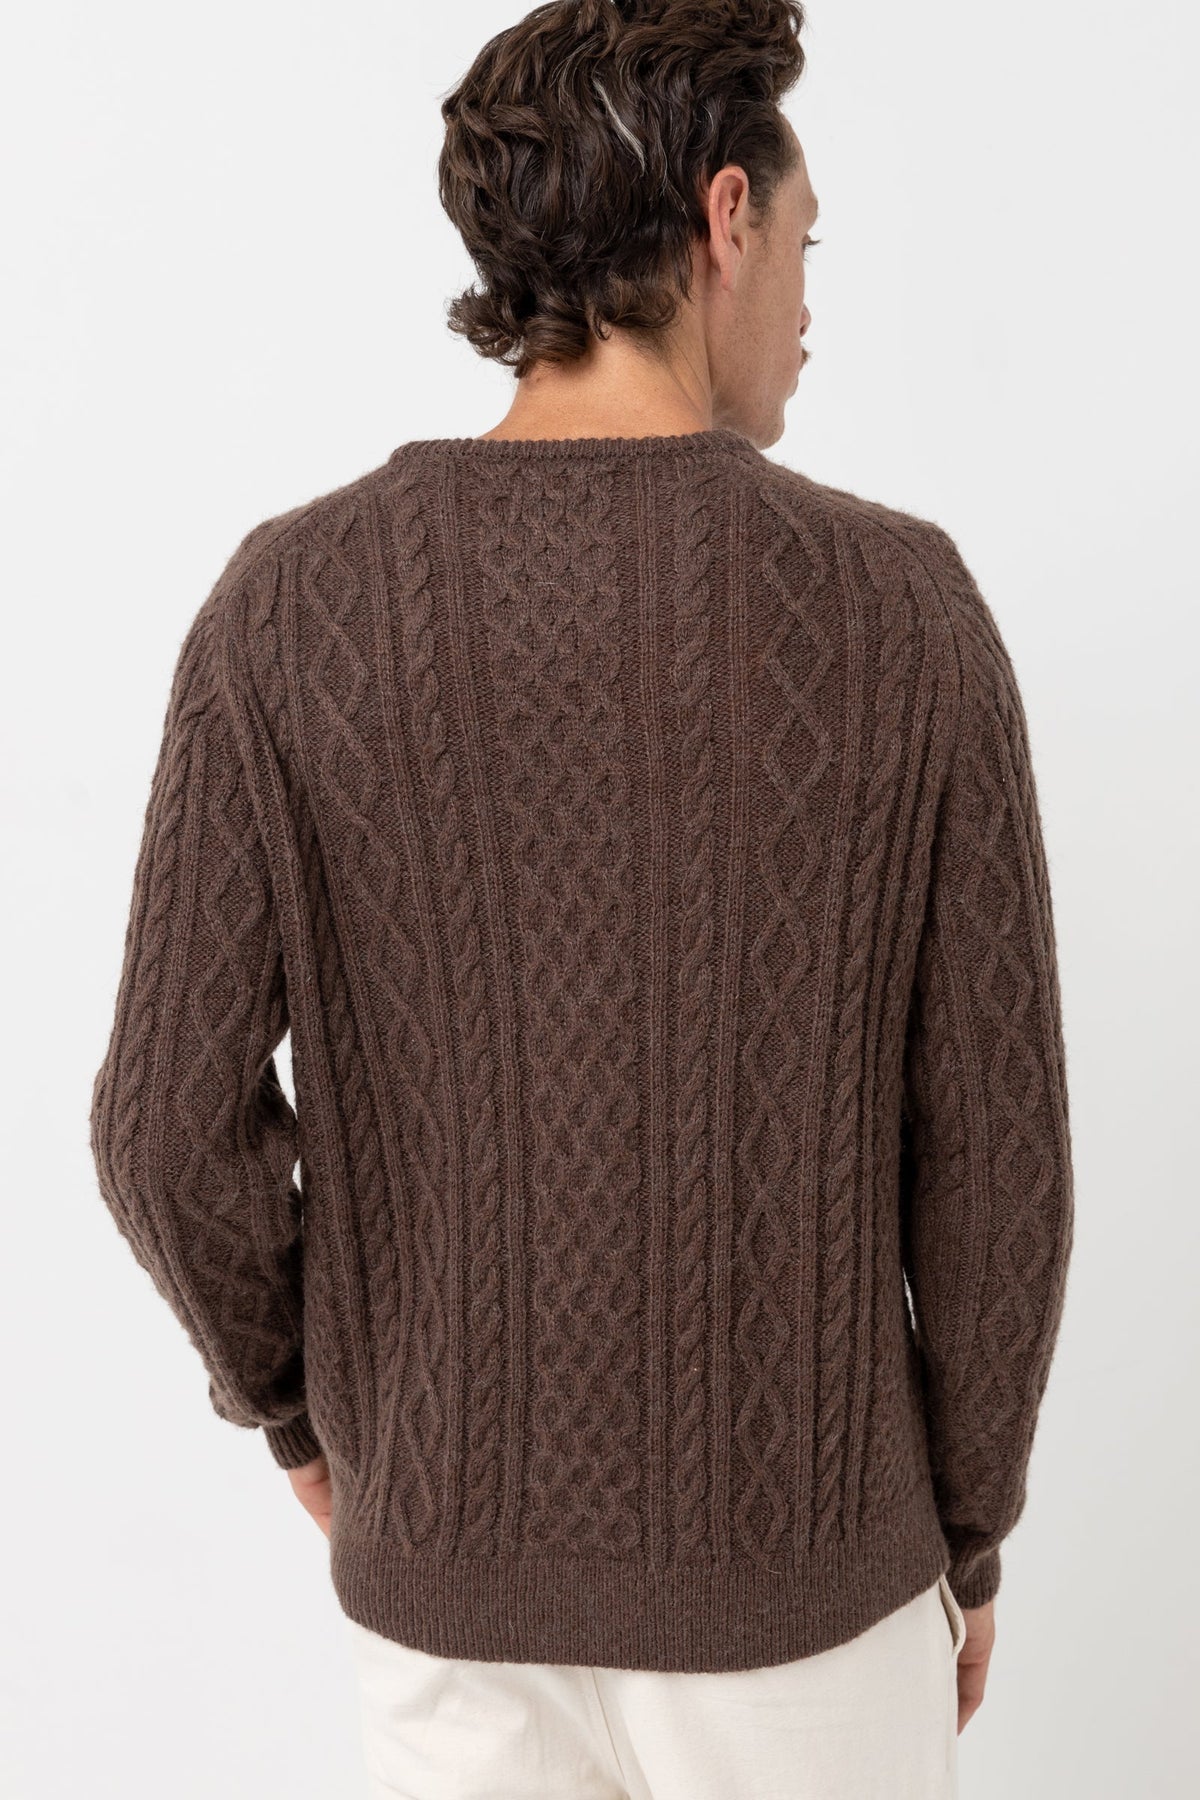 Mohair Fishermans Knit Sweater Brown